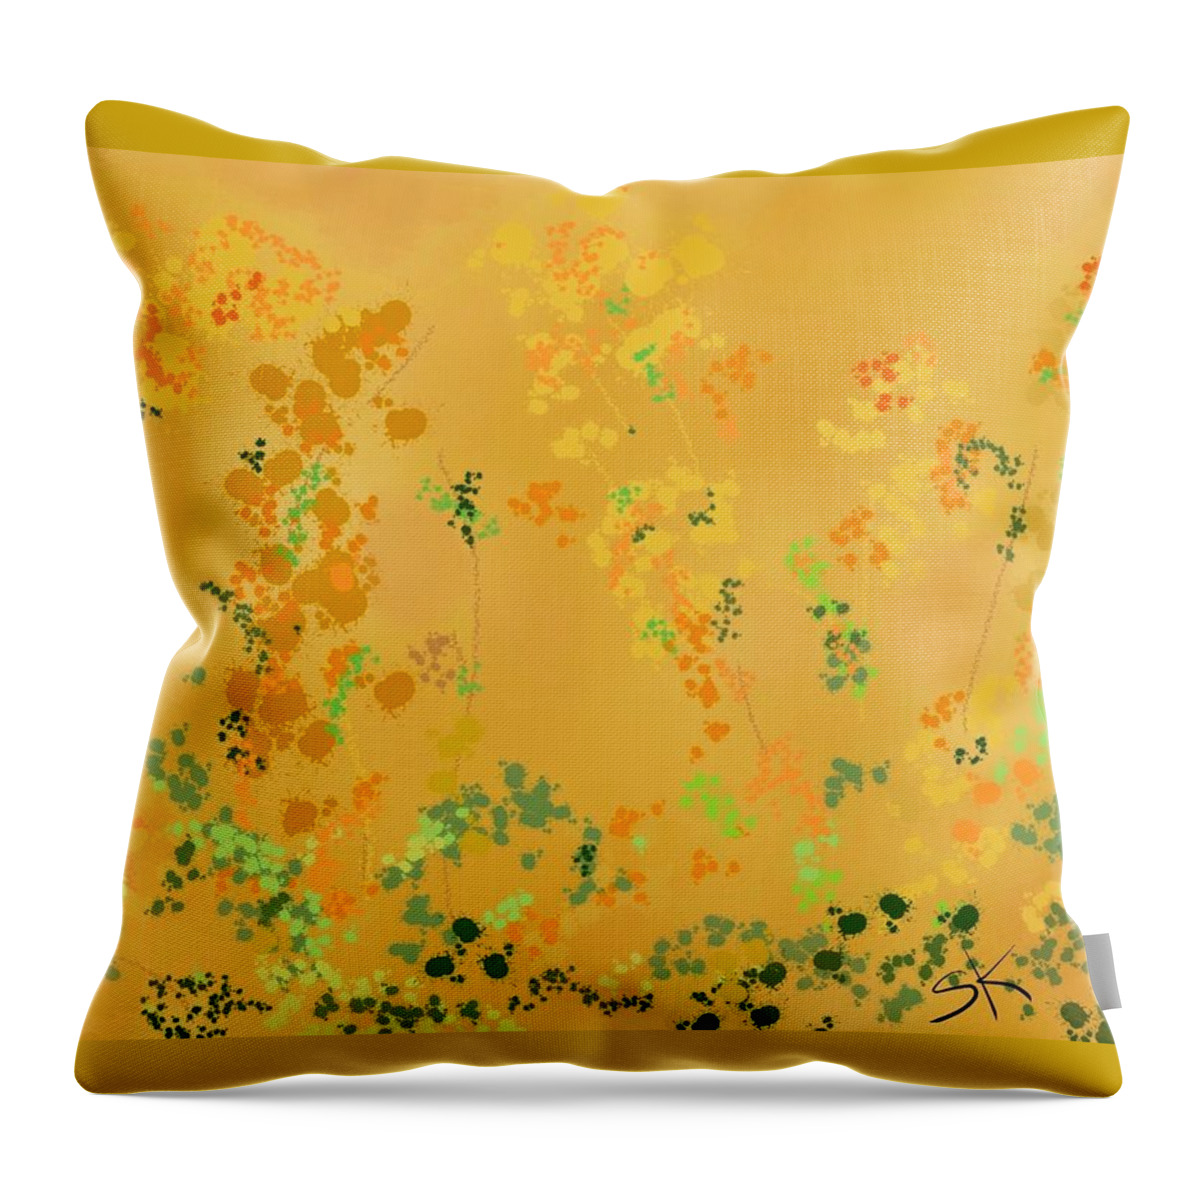 Floral Throw Pillow featuring the digital art Delicate by Sherry Killam